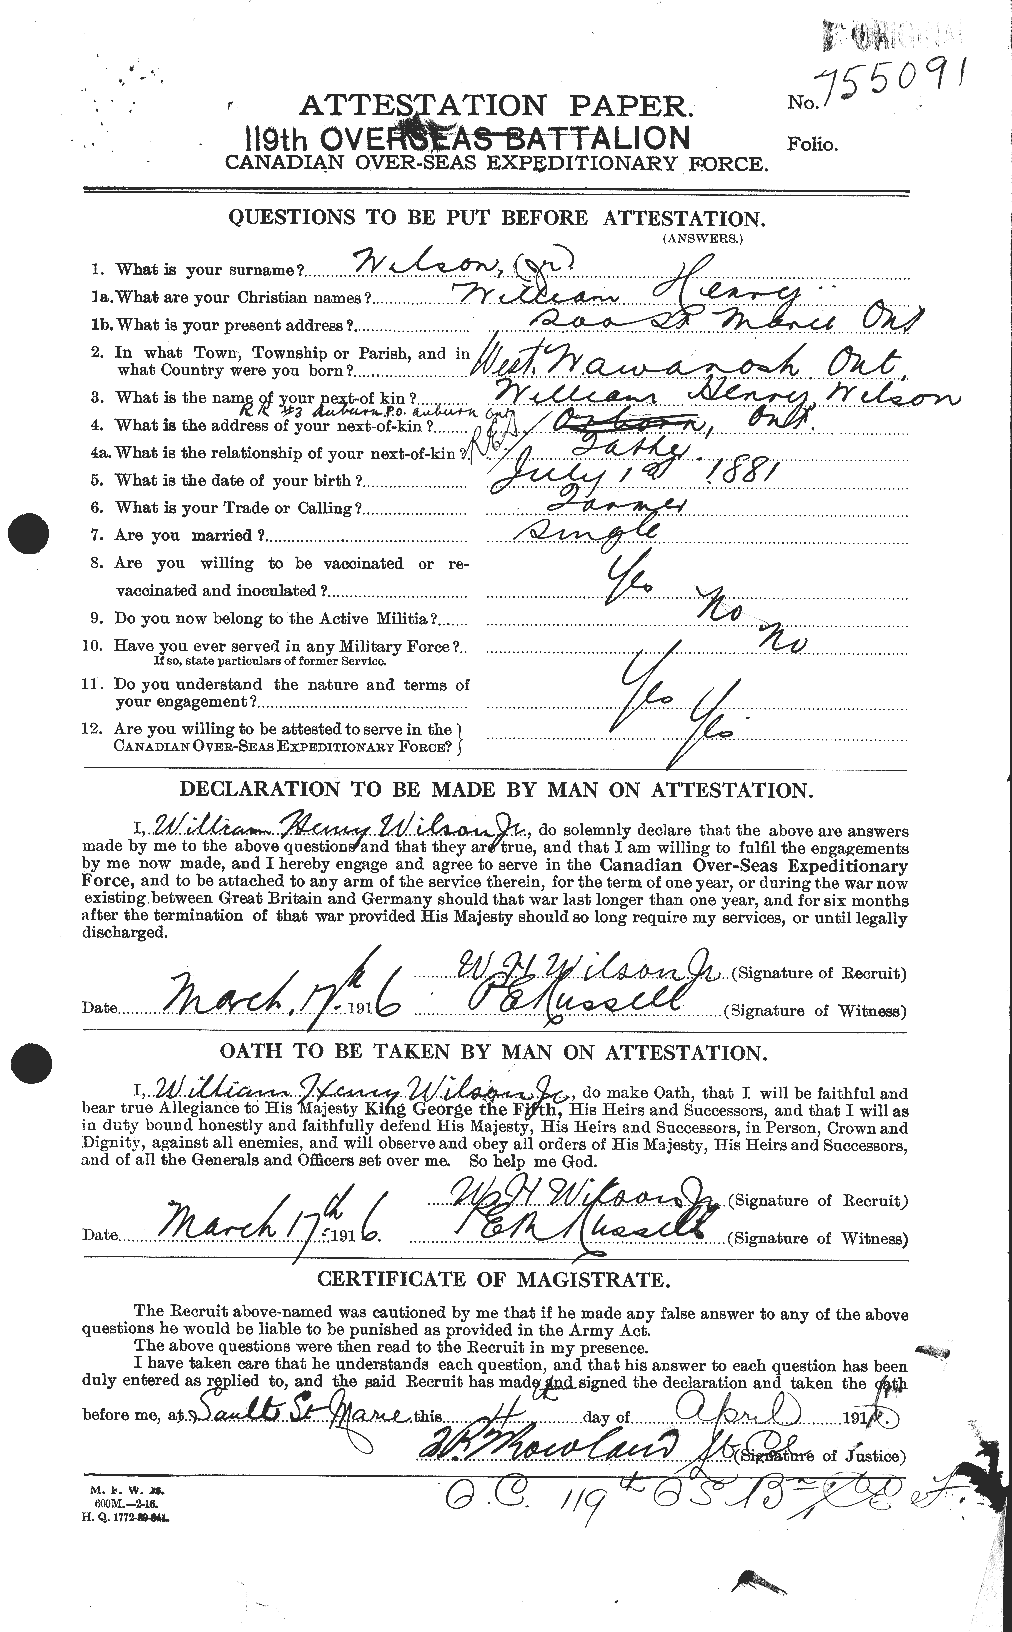 Personnel Records of the First World War - CEF 682025a